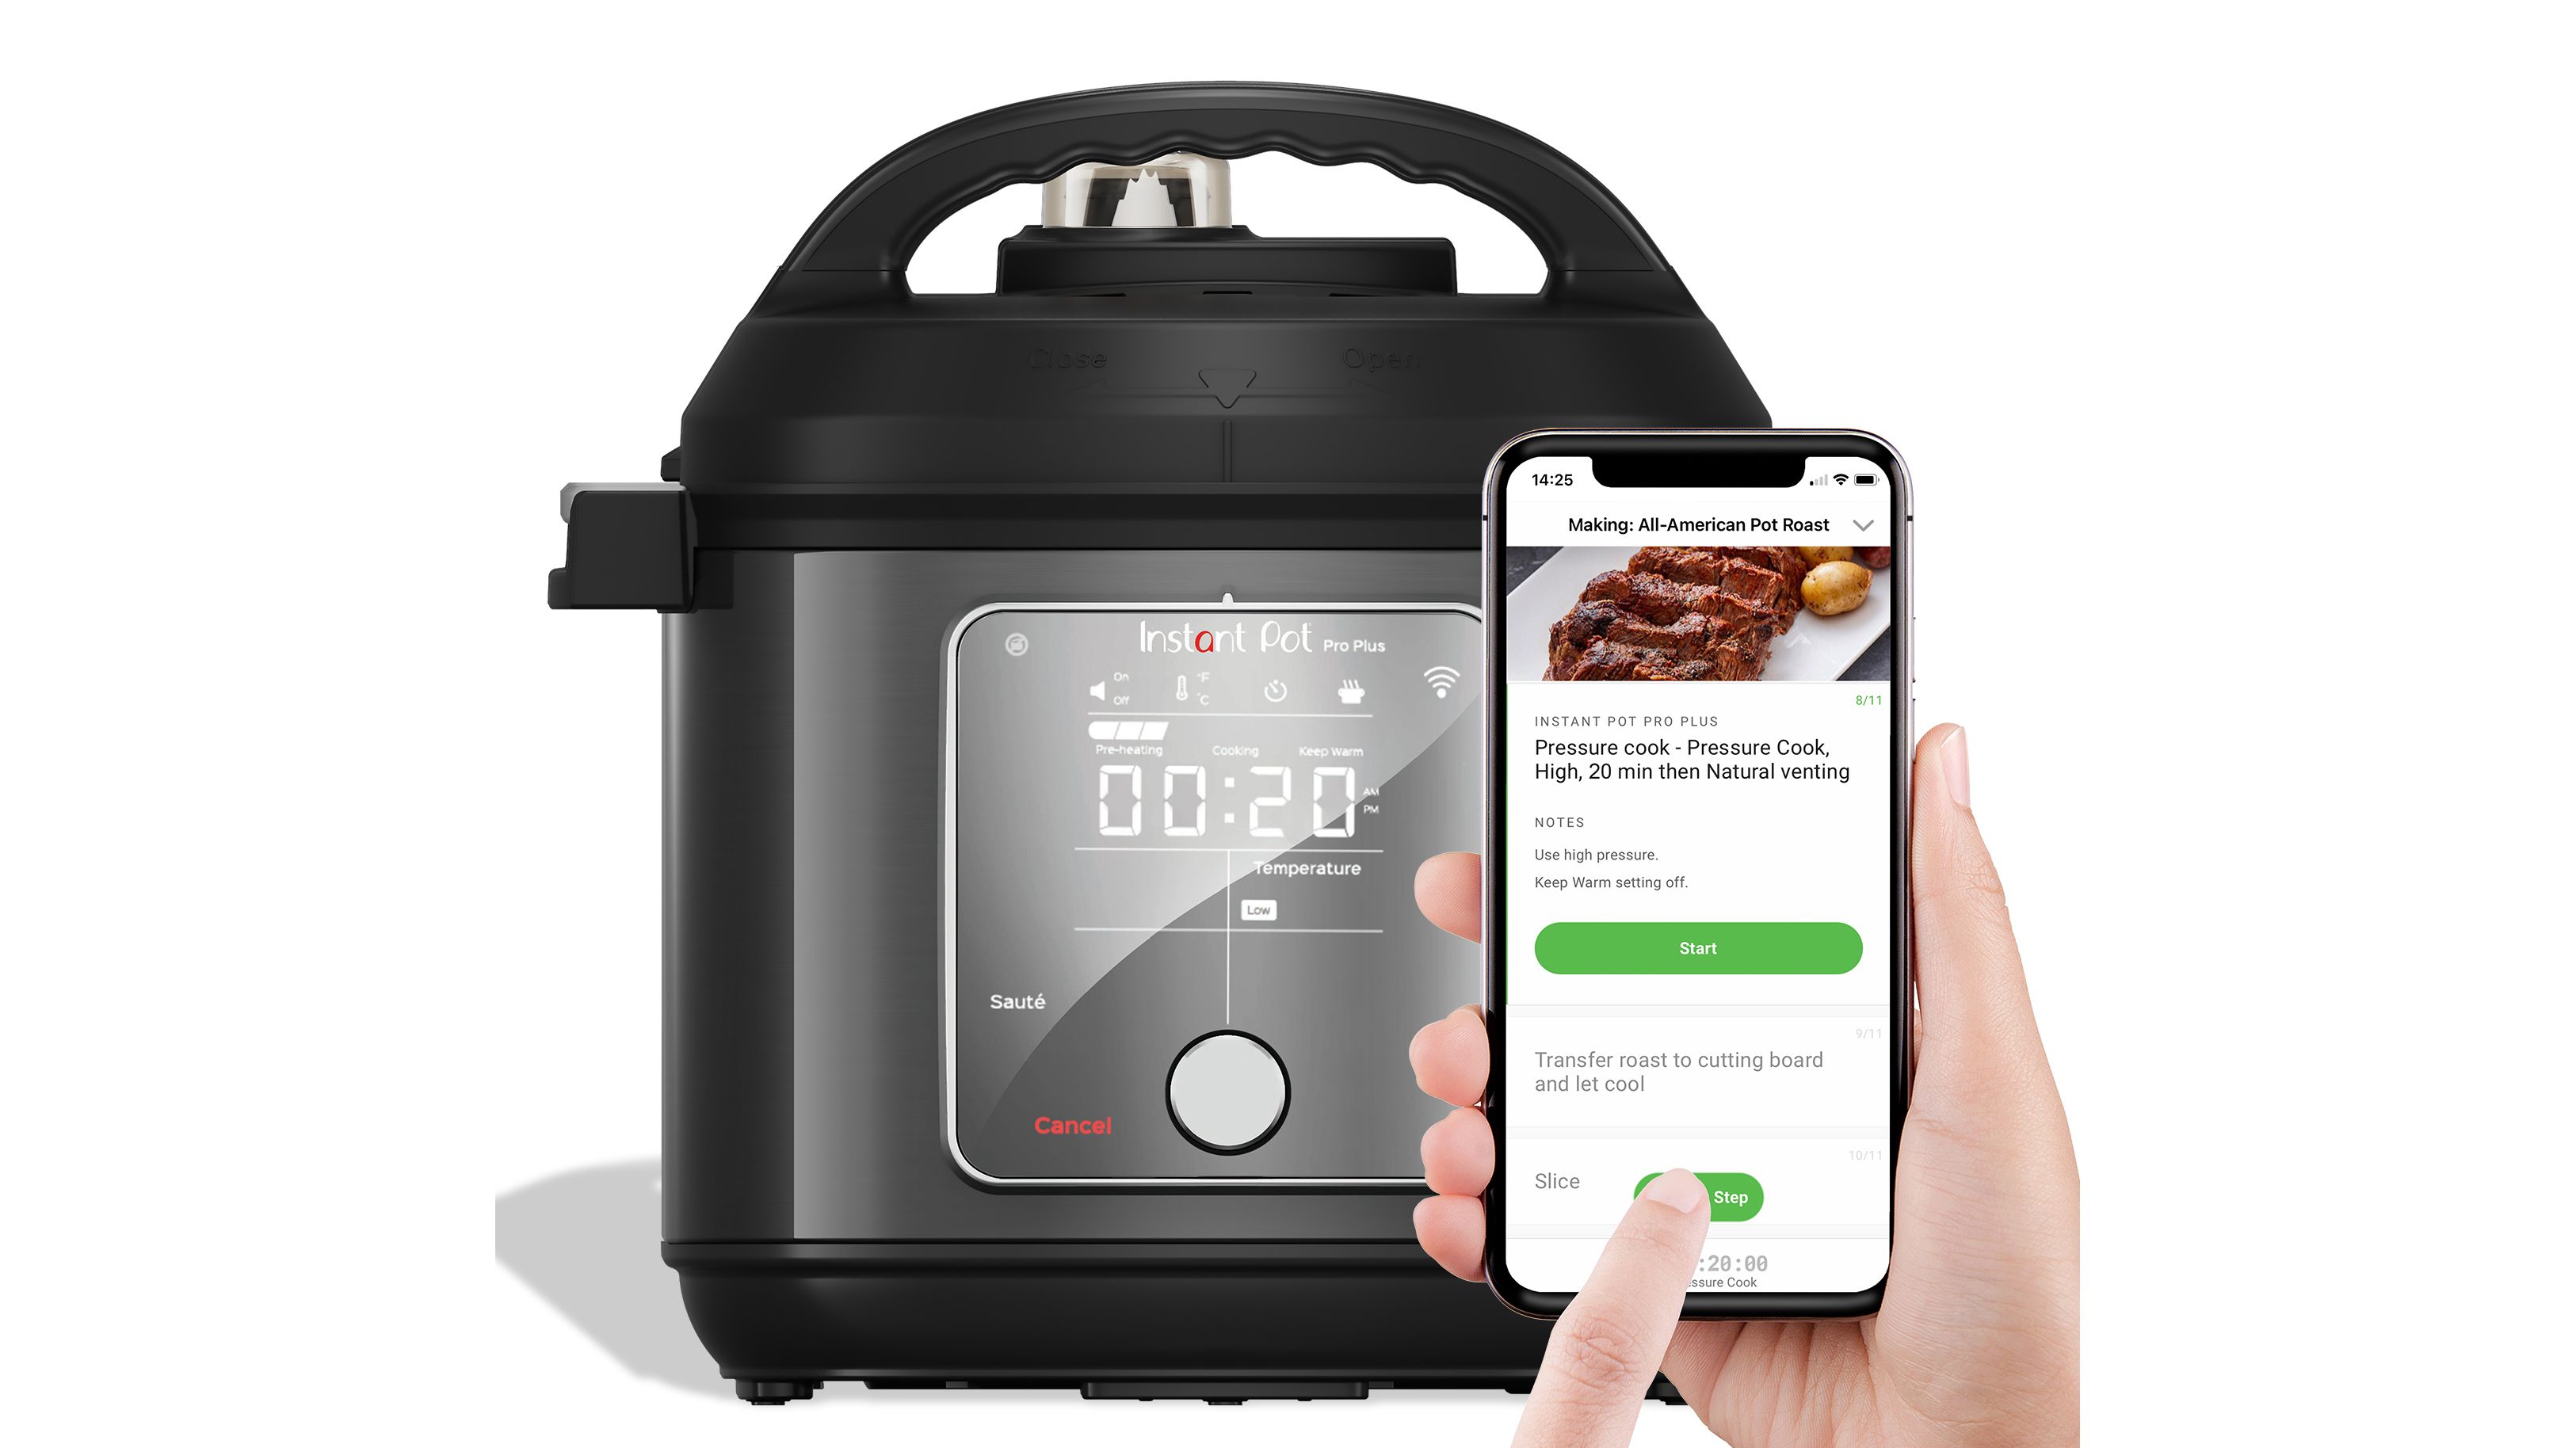 Instant Pot Pro Plus (latest WiFi model) likely discontinued : r